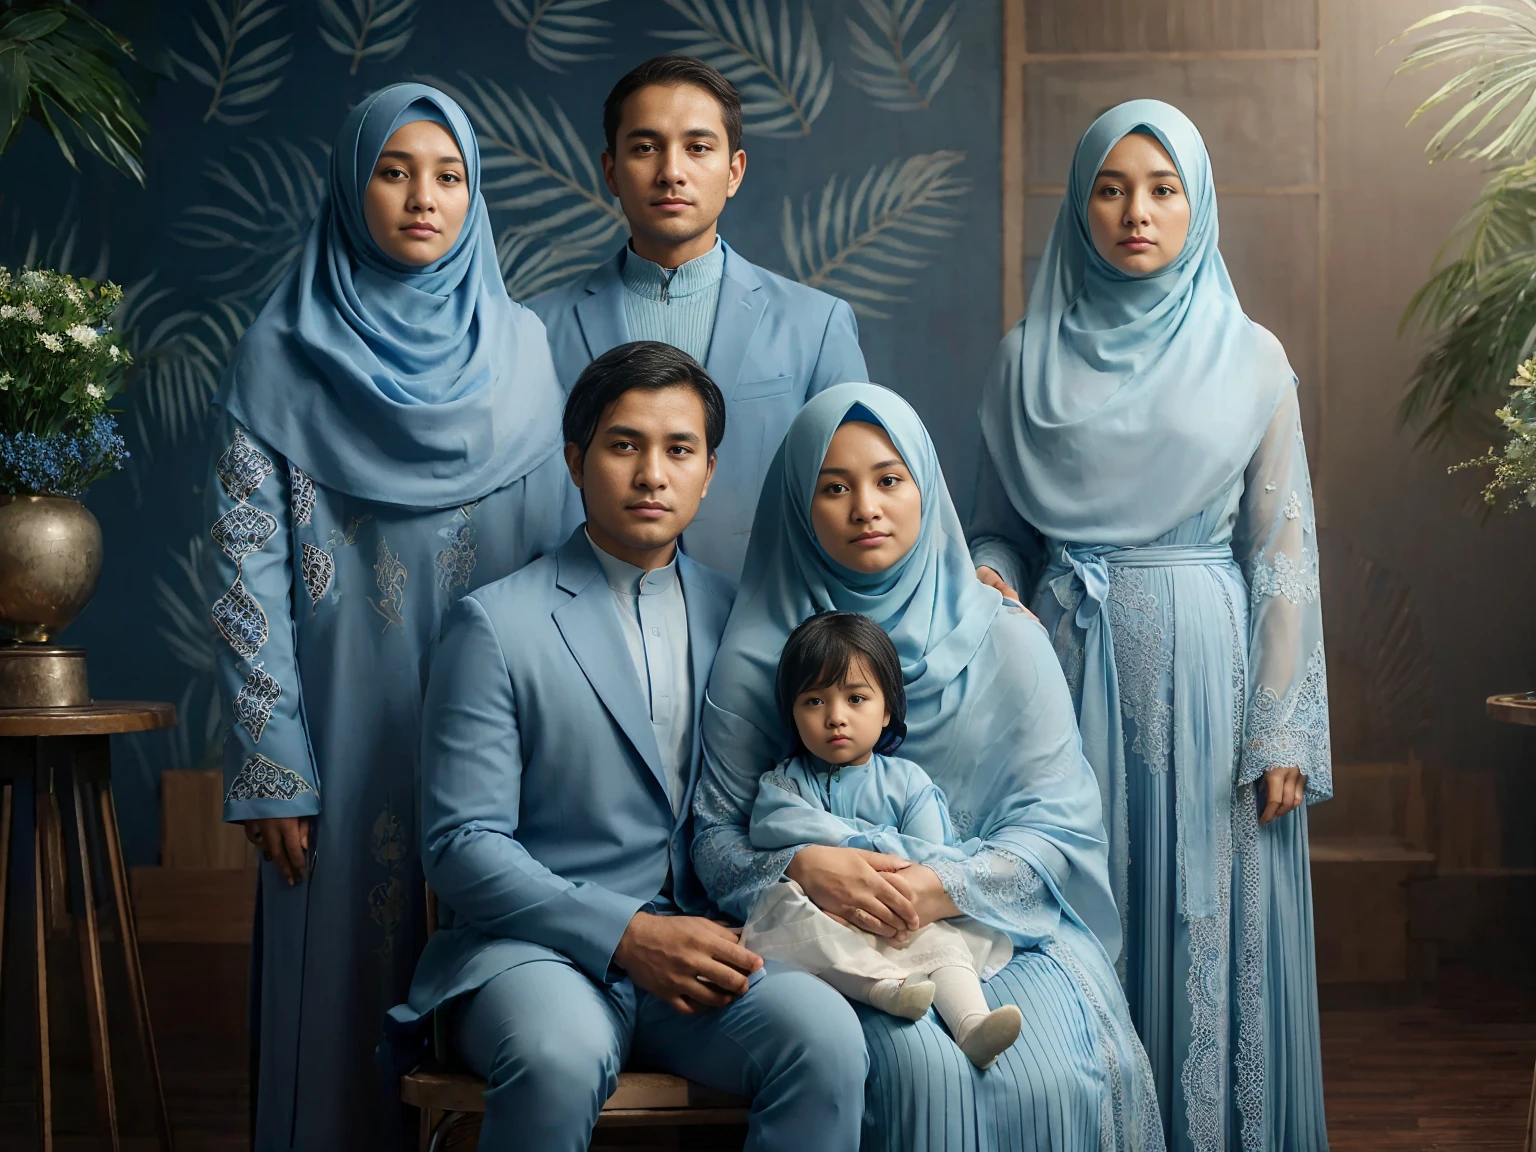 Studio Photography, close up, 5 peoples, Indonesian, sits on couple's chair, a man aged 55 short crew hair and a slightly overweight woman wearing long compliant pashmina hijab in sky blue color holding one  aged 3, stands behind them there's a man aged 27 and two woman aged 25 wearing hijab, all wearing exclusive blue sky suit and blue sky gamis sharia dress with long compliant sharia hijab in sky blue color, set in a studio with navy leaf patterned walls, warm hug pose, green flower vases, side tables, fresh color, 8k, photography, UHD.